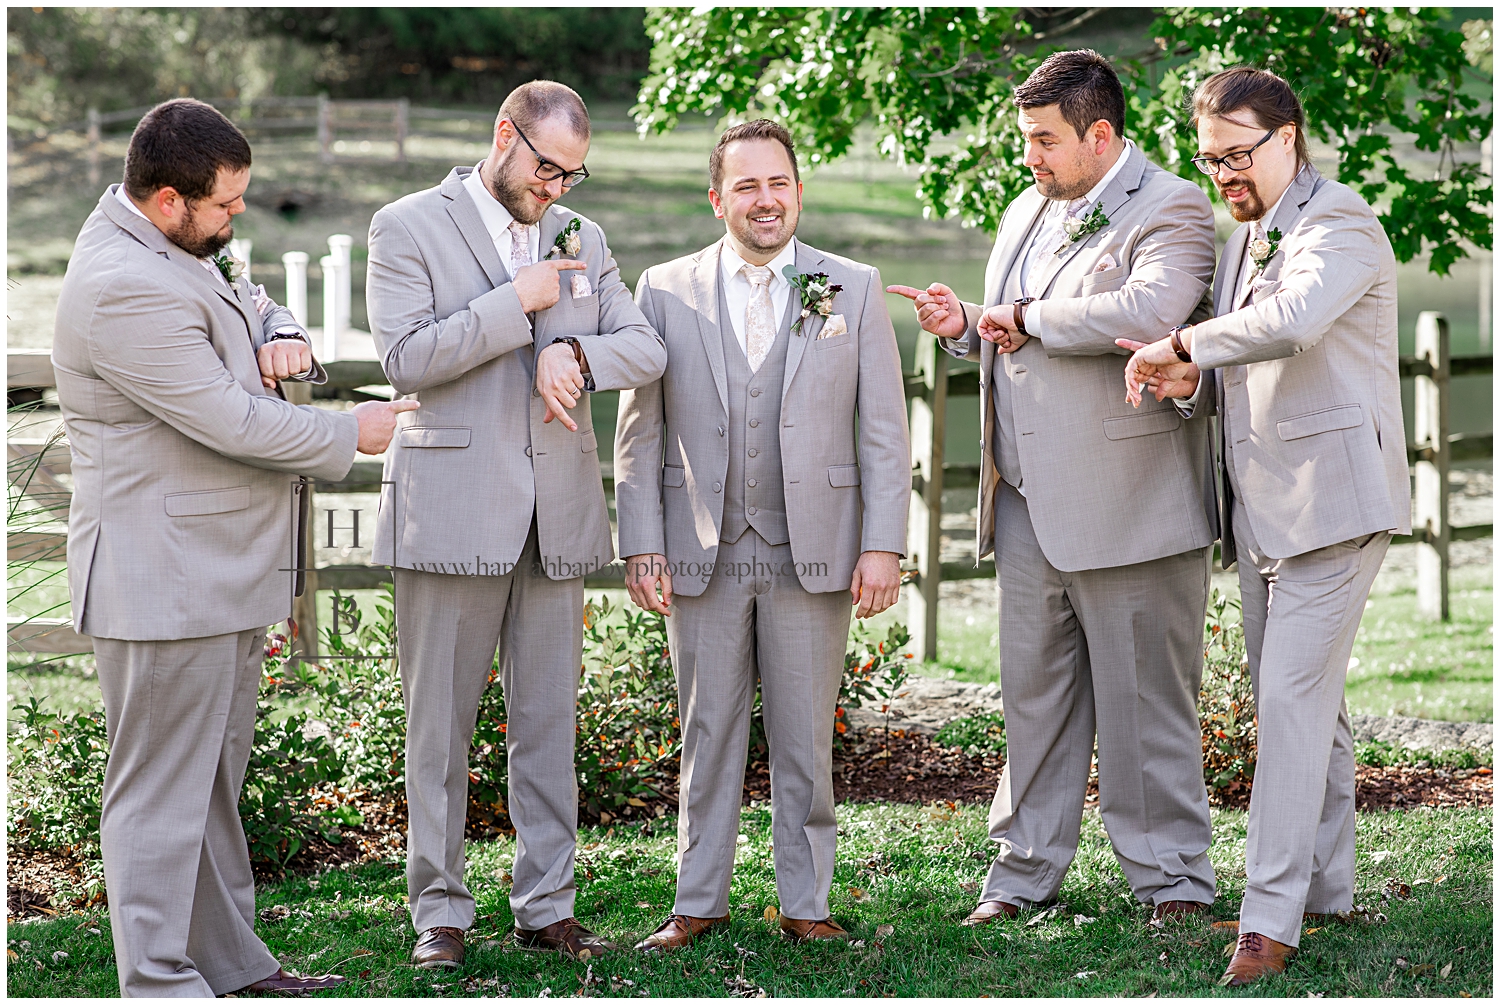 Groomsmen point at watches and groom.